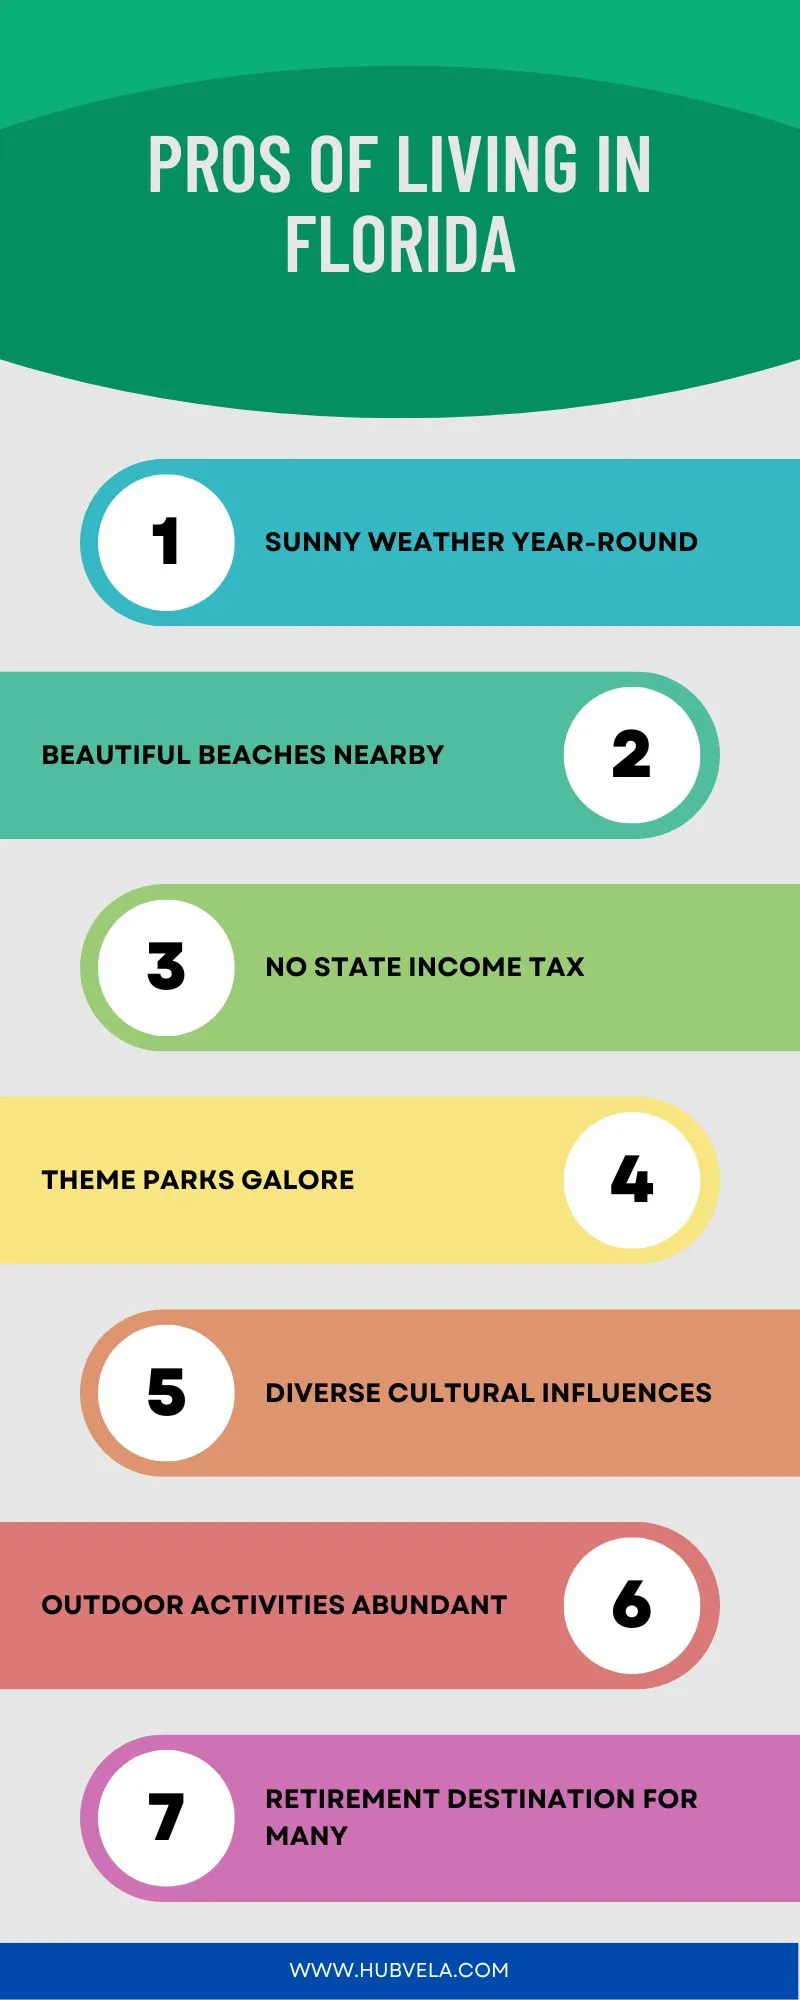 Pros of Living in Florida Infographic